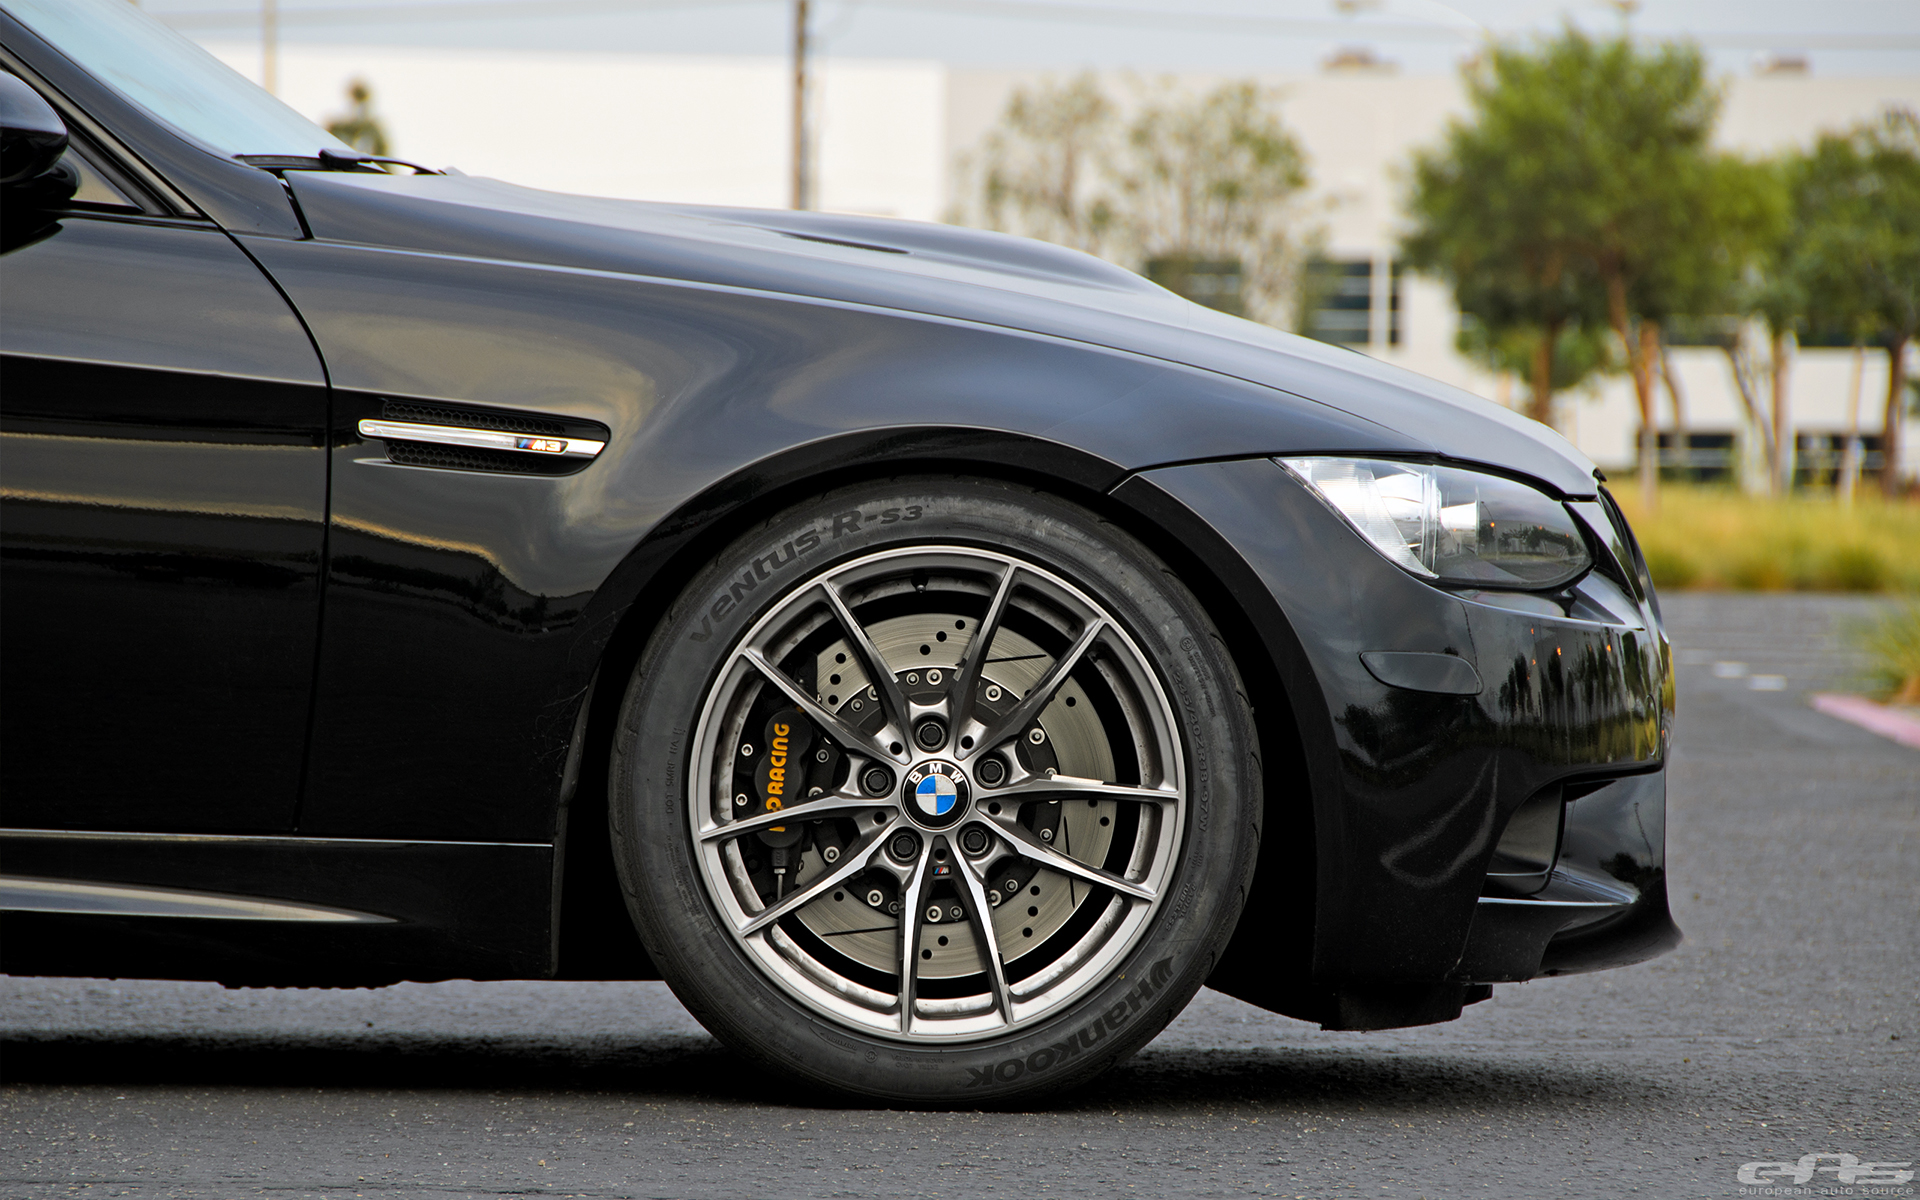 Bmw m3 e90 issues #6